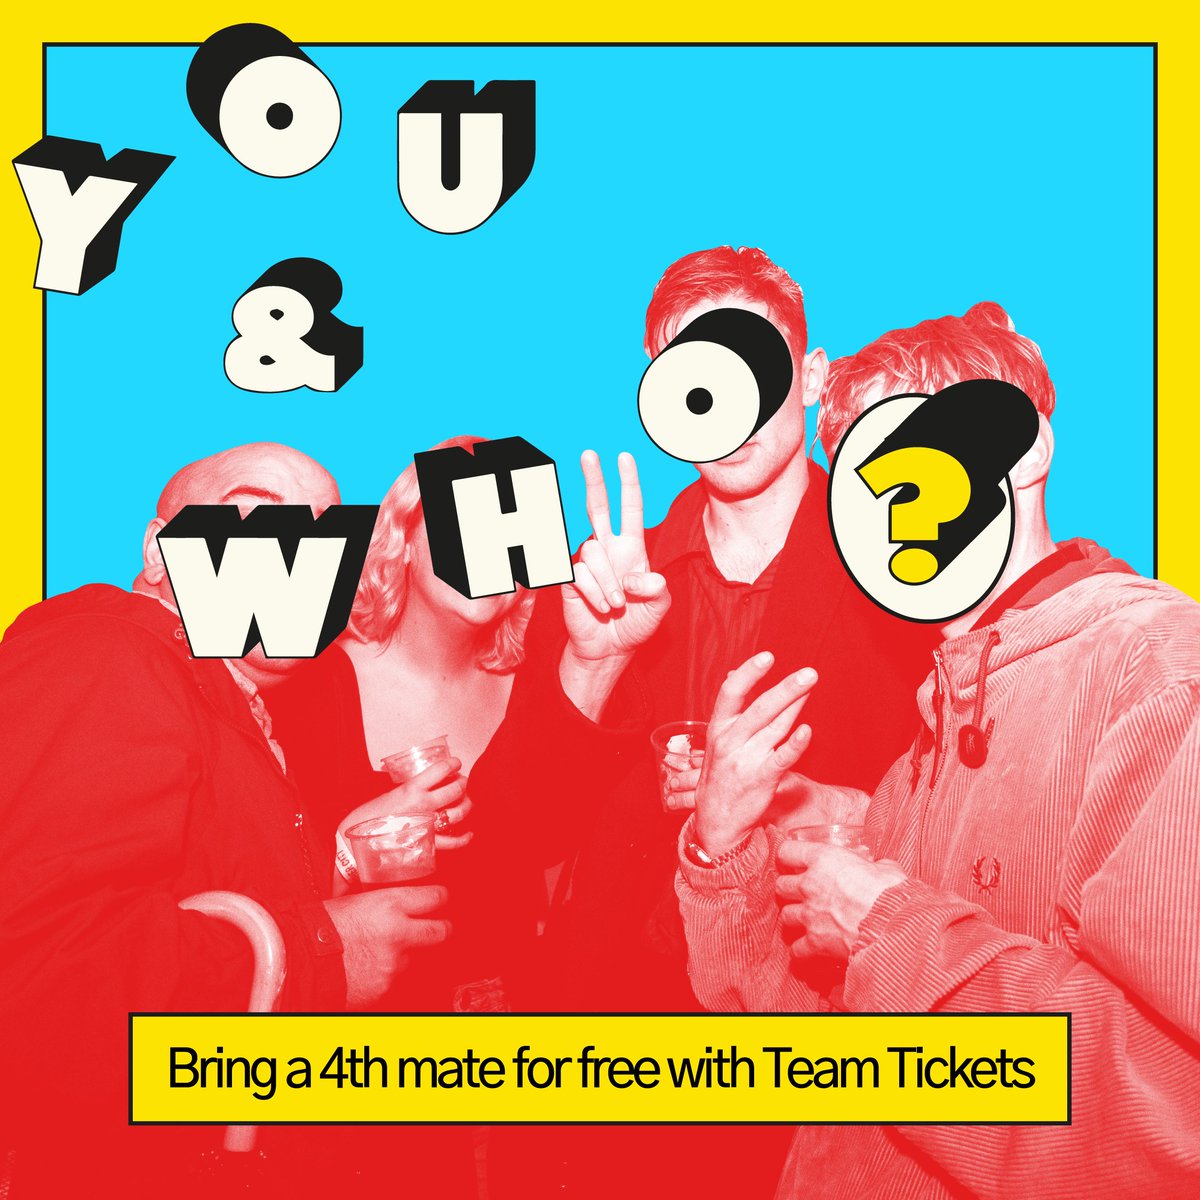 My mates and I saw you from across the bar and we really dig your vibe. Looking for a fourth? We’ll sweeten the deal — you can bring ‘em to Sounds for free. Our 4-for-3 Team Ticket offer is *extremely limited*, so don’t mess around: head to soundsfromtheothercity.com/tickets to bag yours.